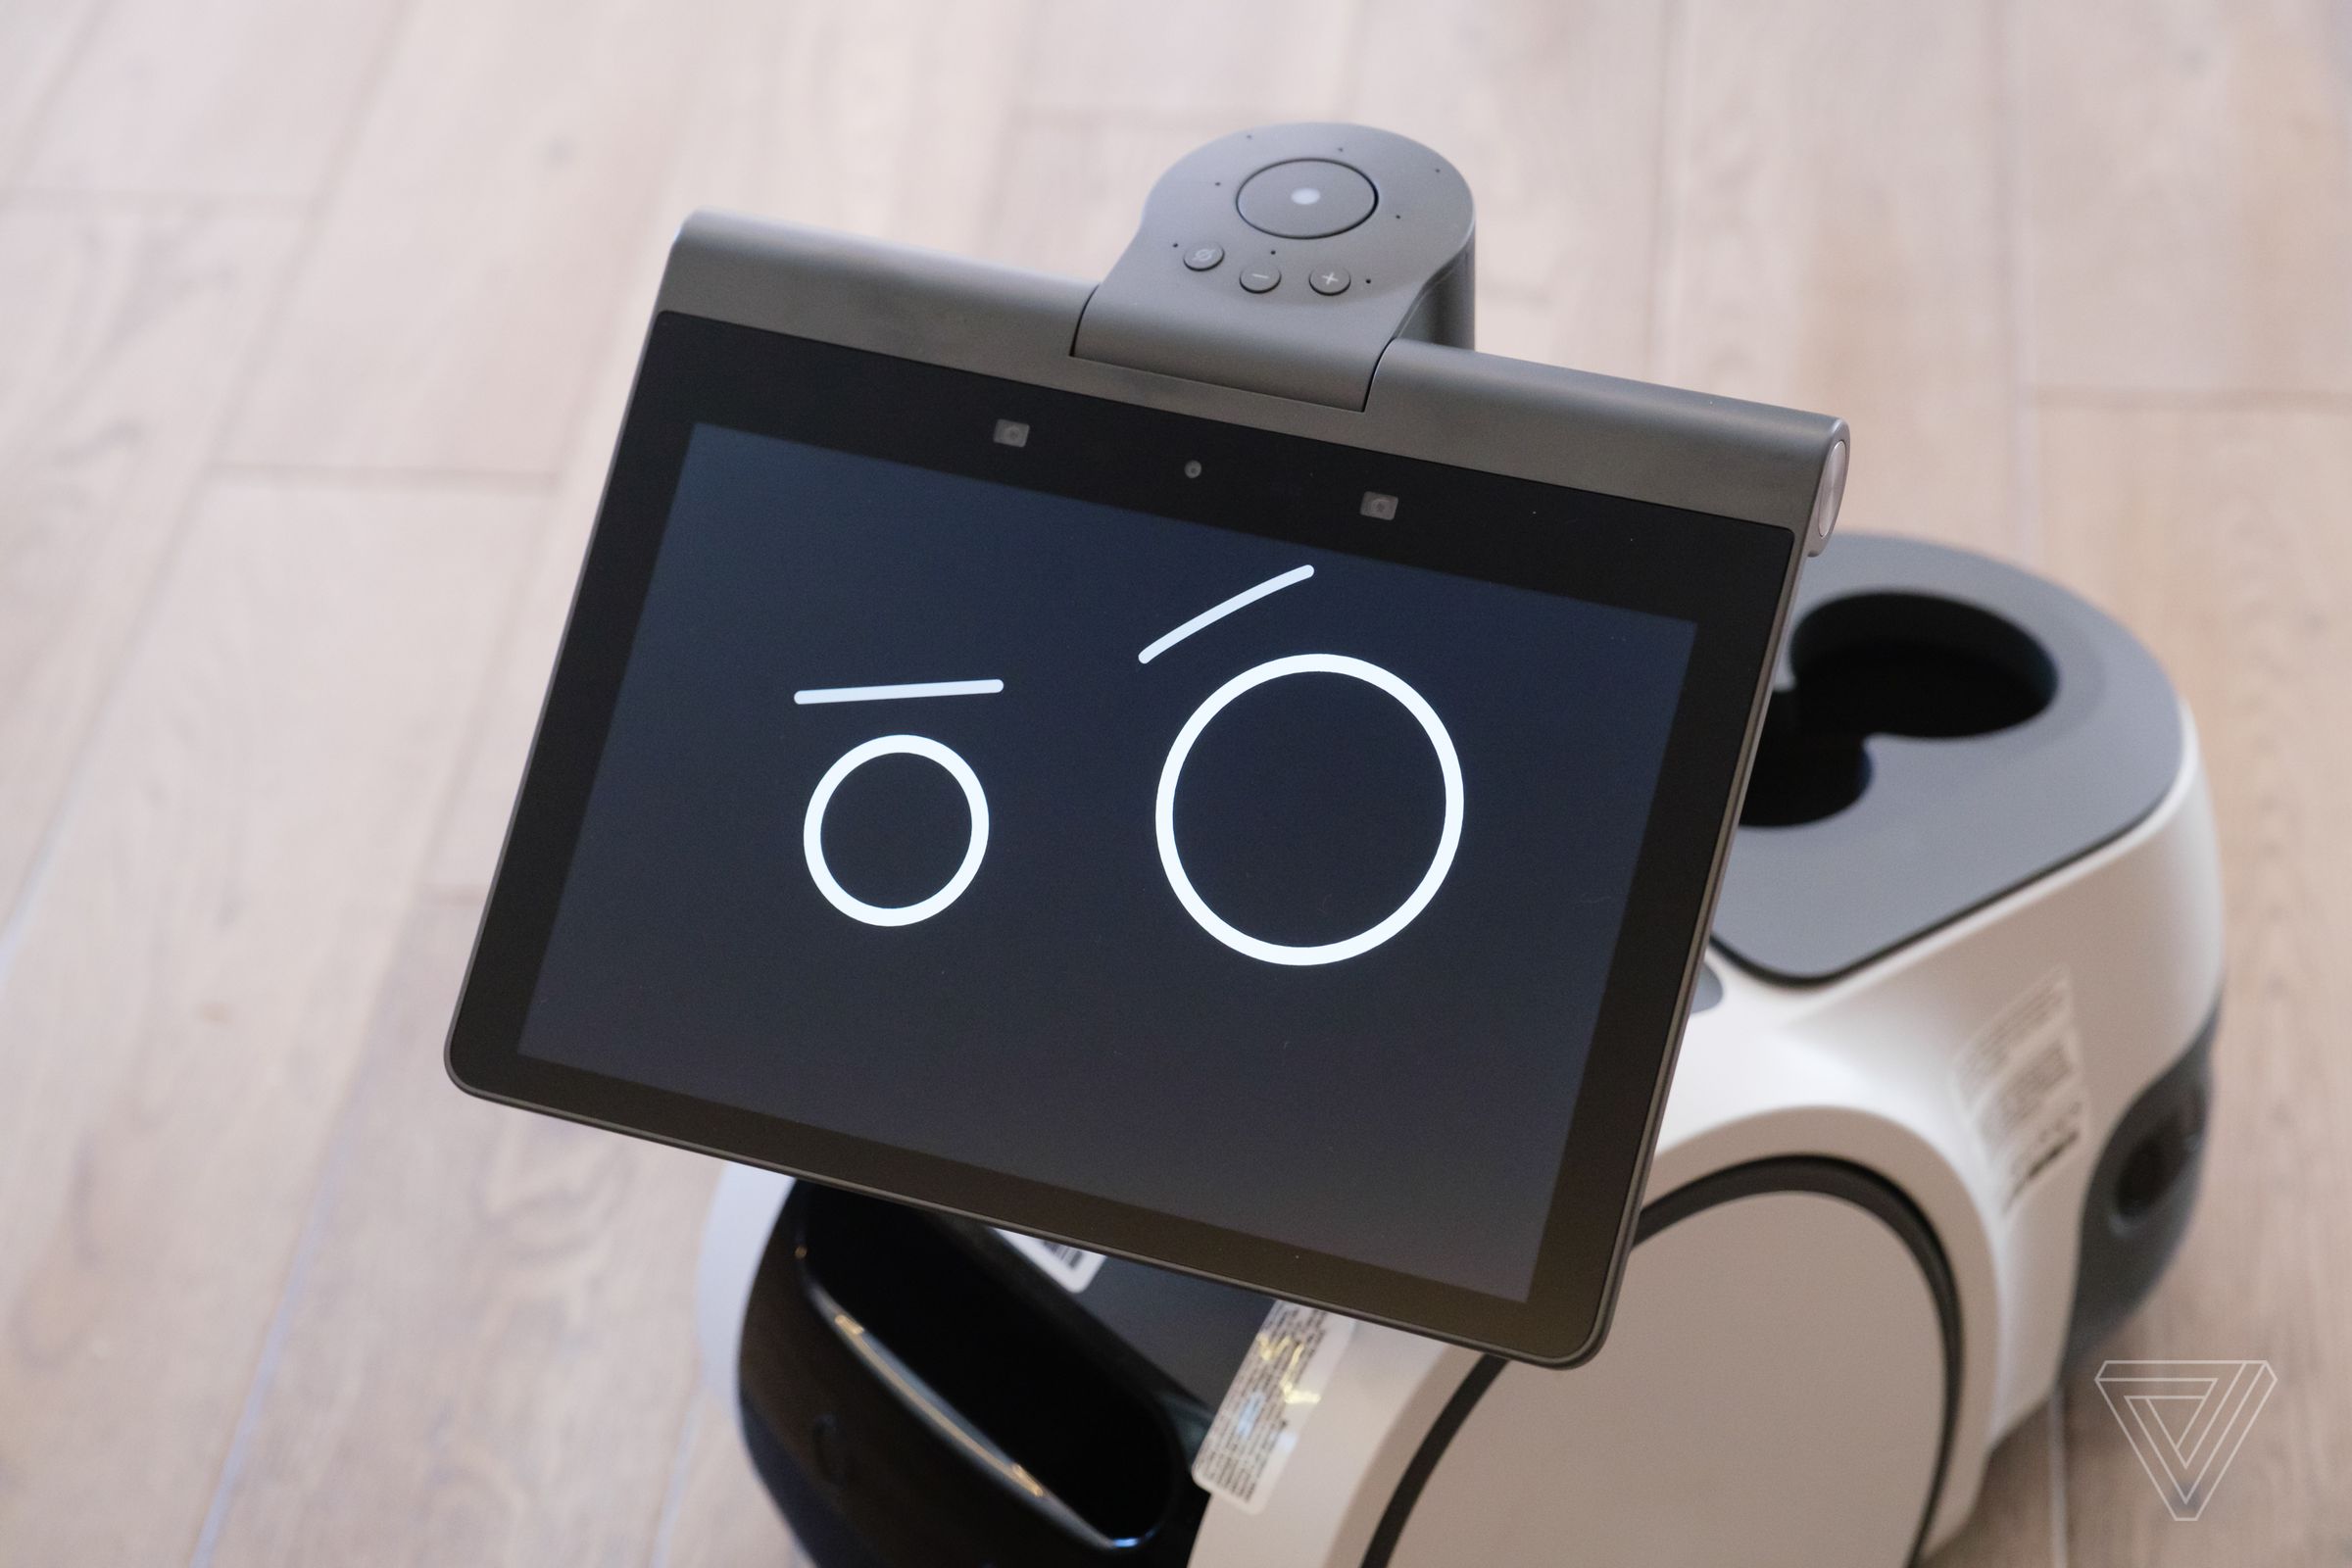 The Astro uses the circles on its screen to express different emotions.